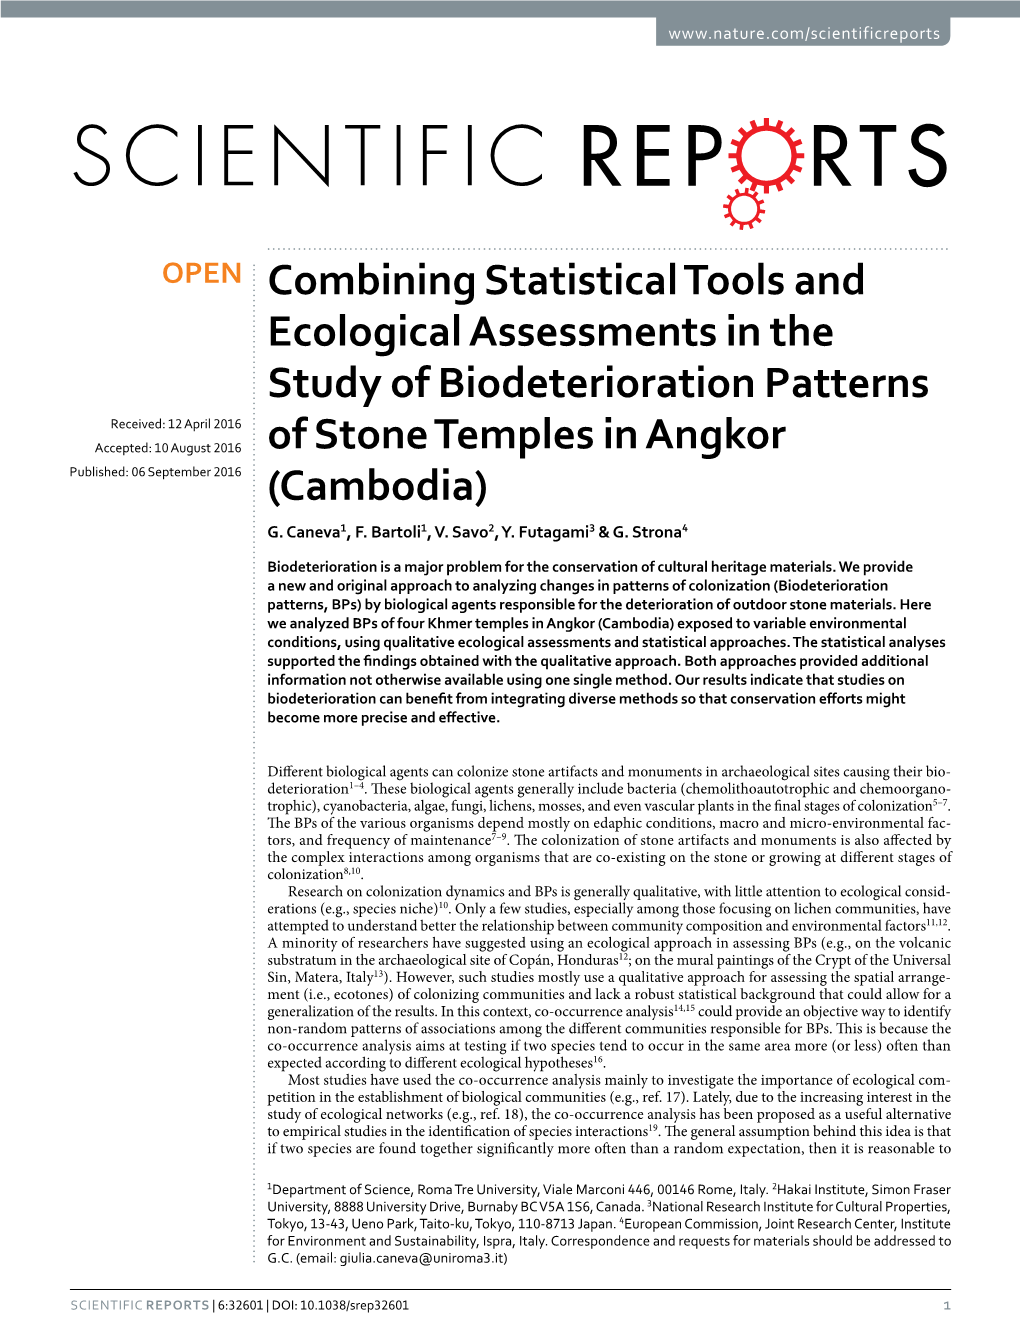 Combining Statistical Tools and Ecological Assessments In